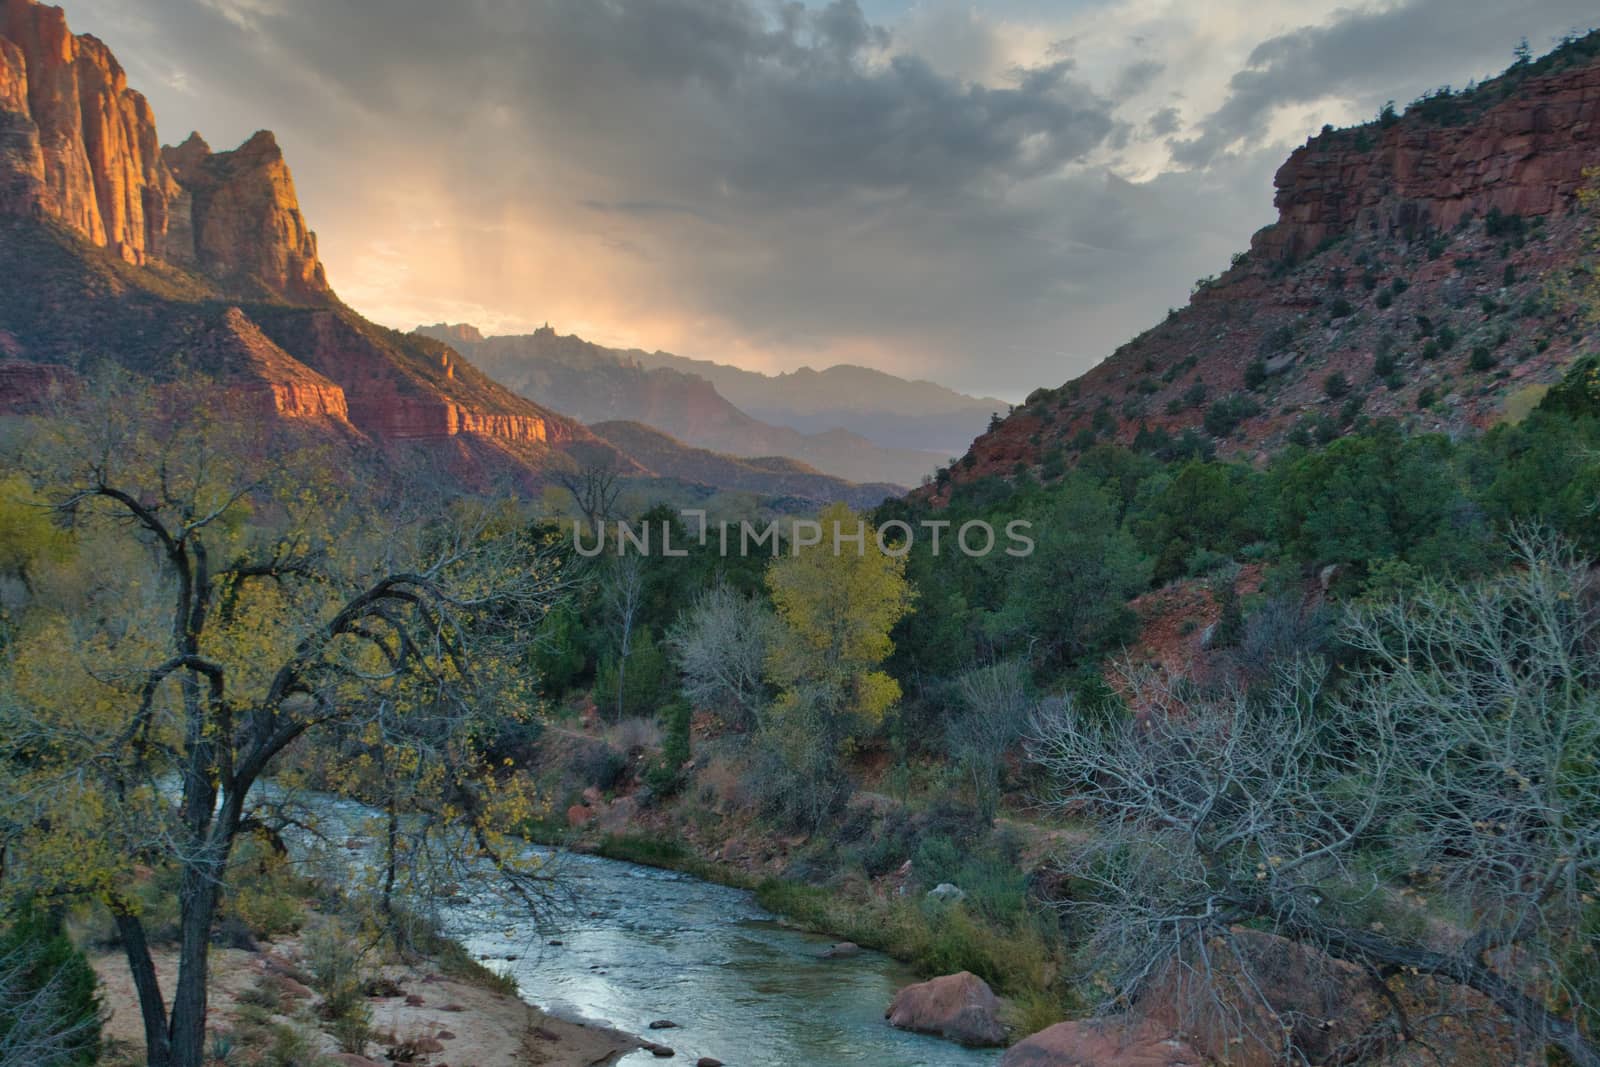 Zion national park in Utah, United States, at Watchman viewpoint. Travel and Tourism.